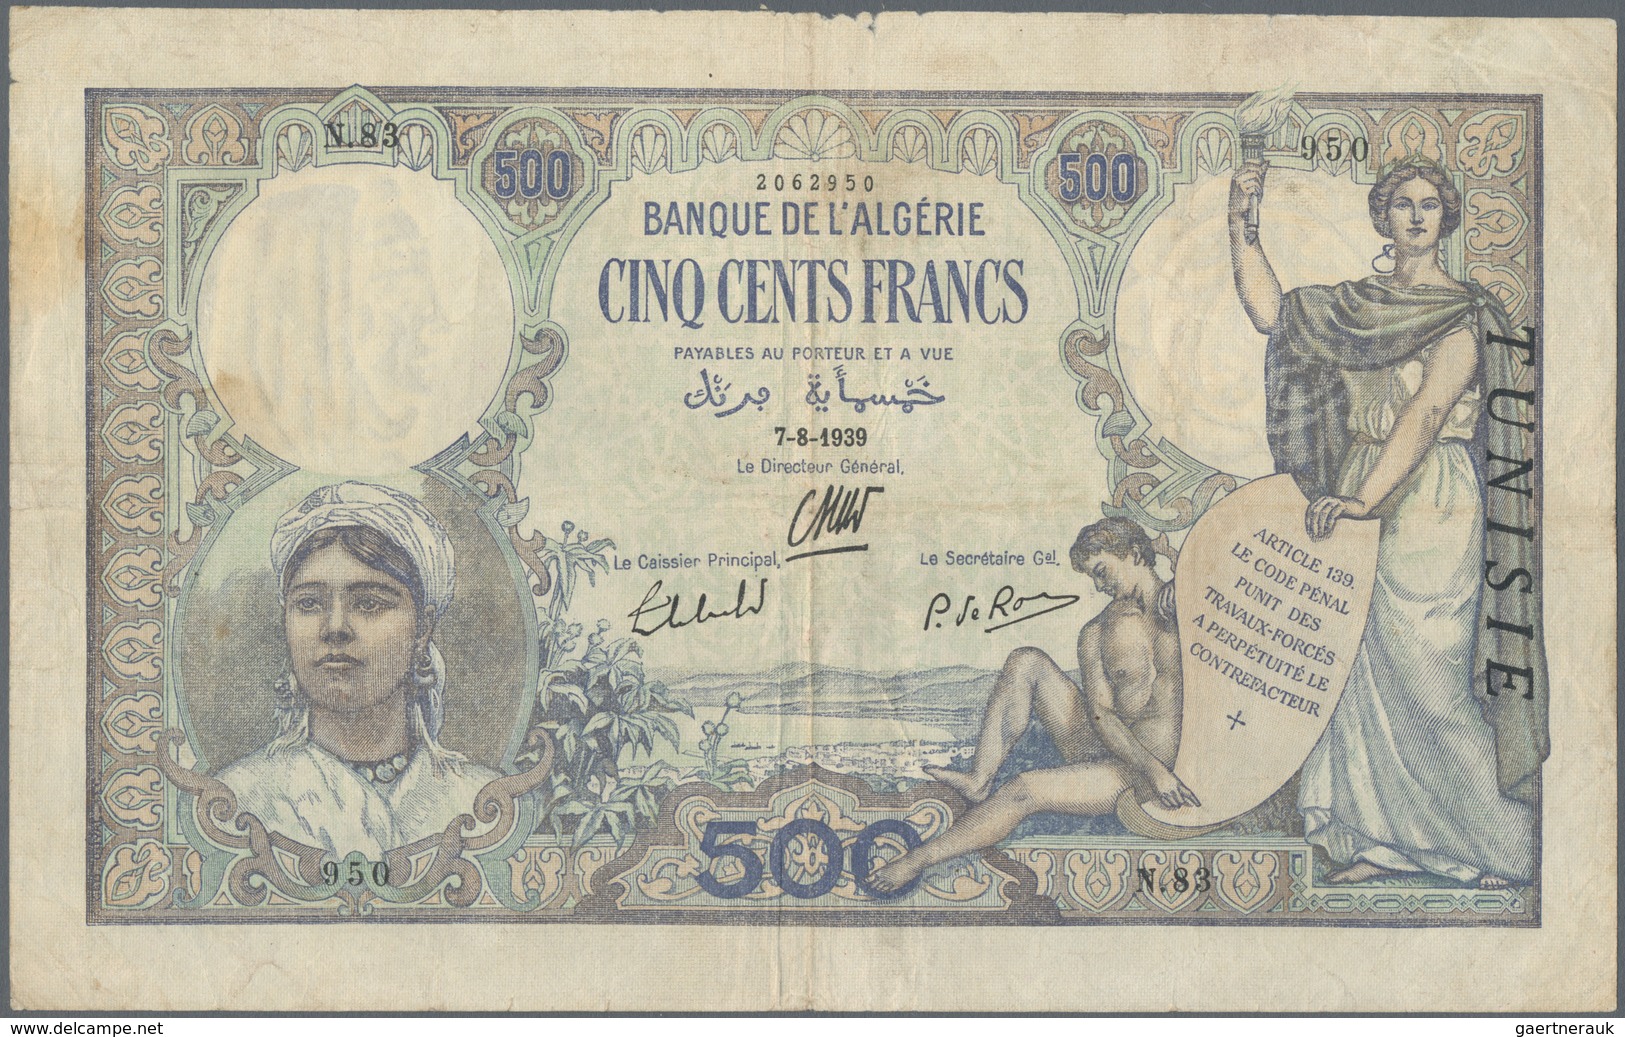 Tunisia / Tunisien: 500 Francs 1939 P. 14, Used With Several Folds And Creases, Minor Pinholes, Ligh - Tusesië